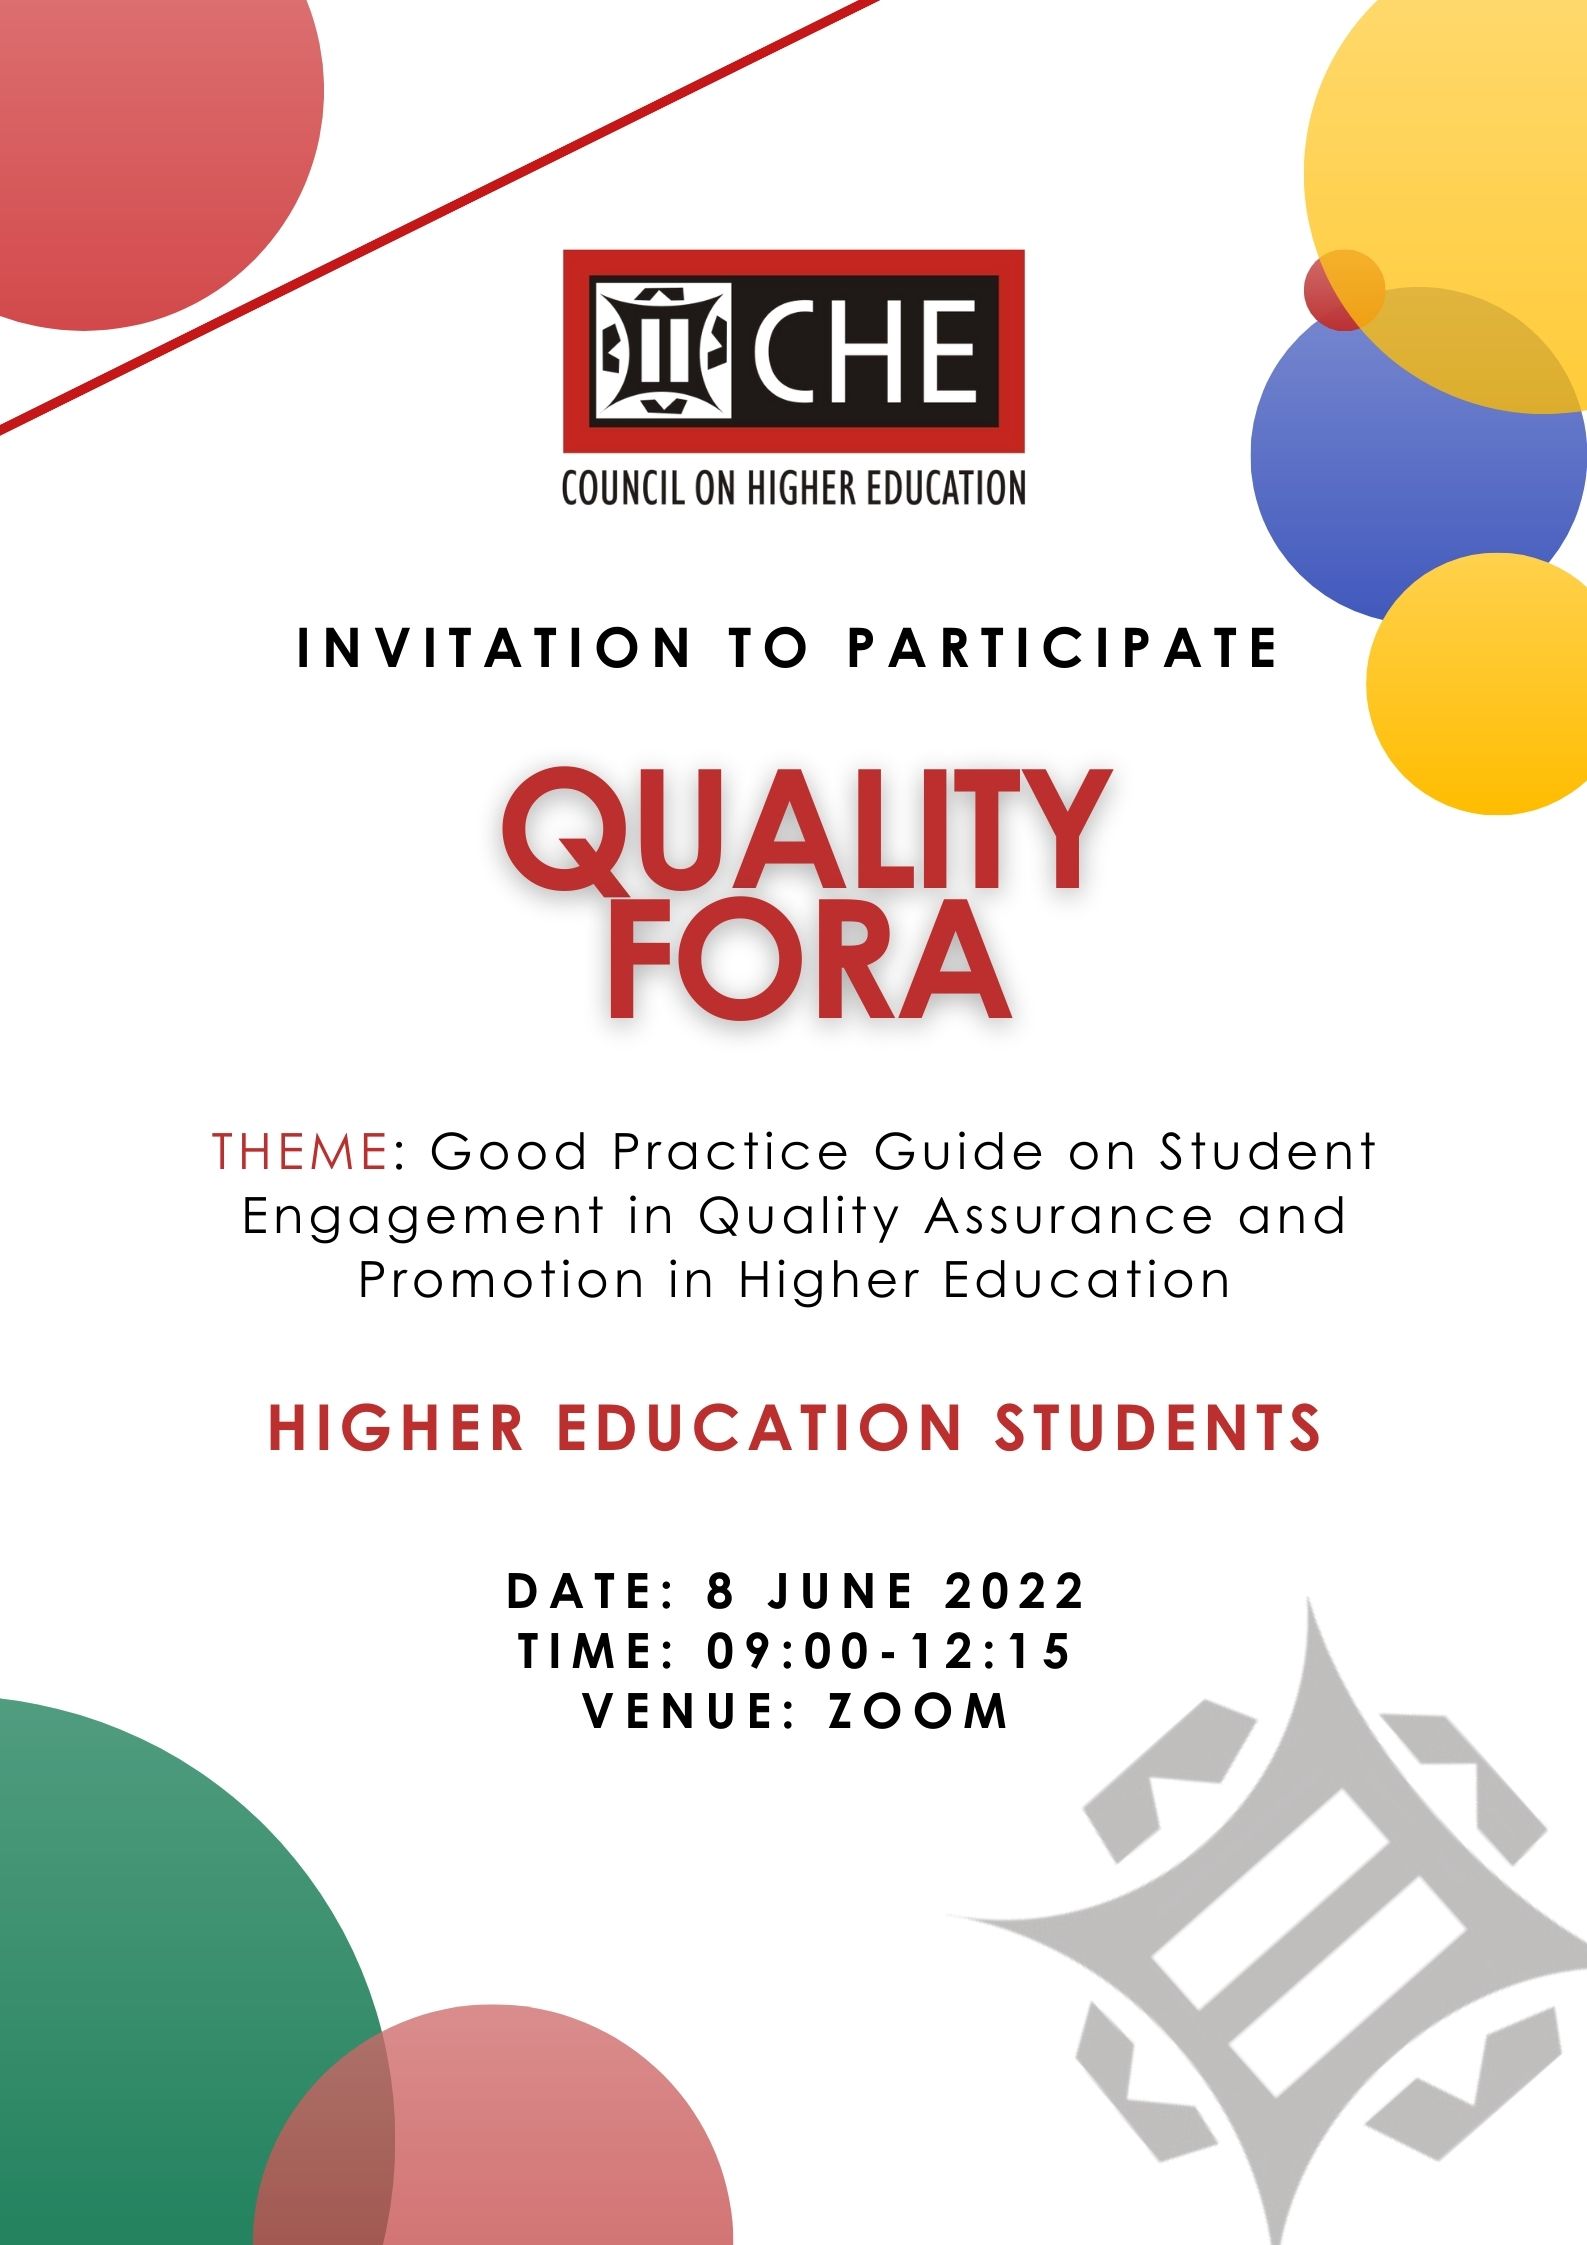 CHE Quality Fira - Higher Education Students